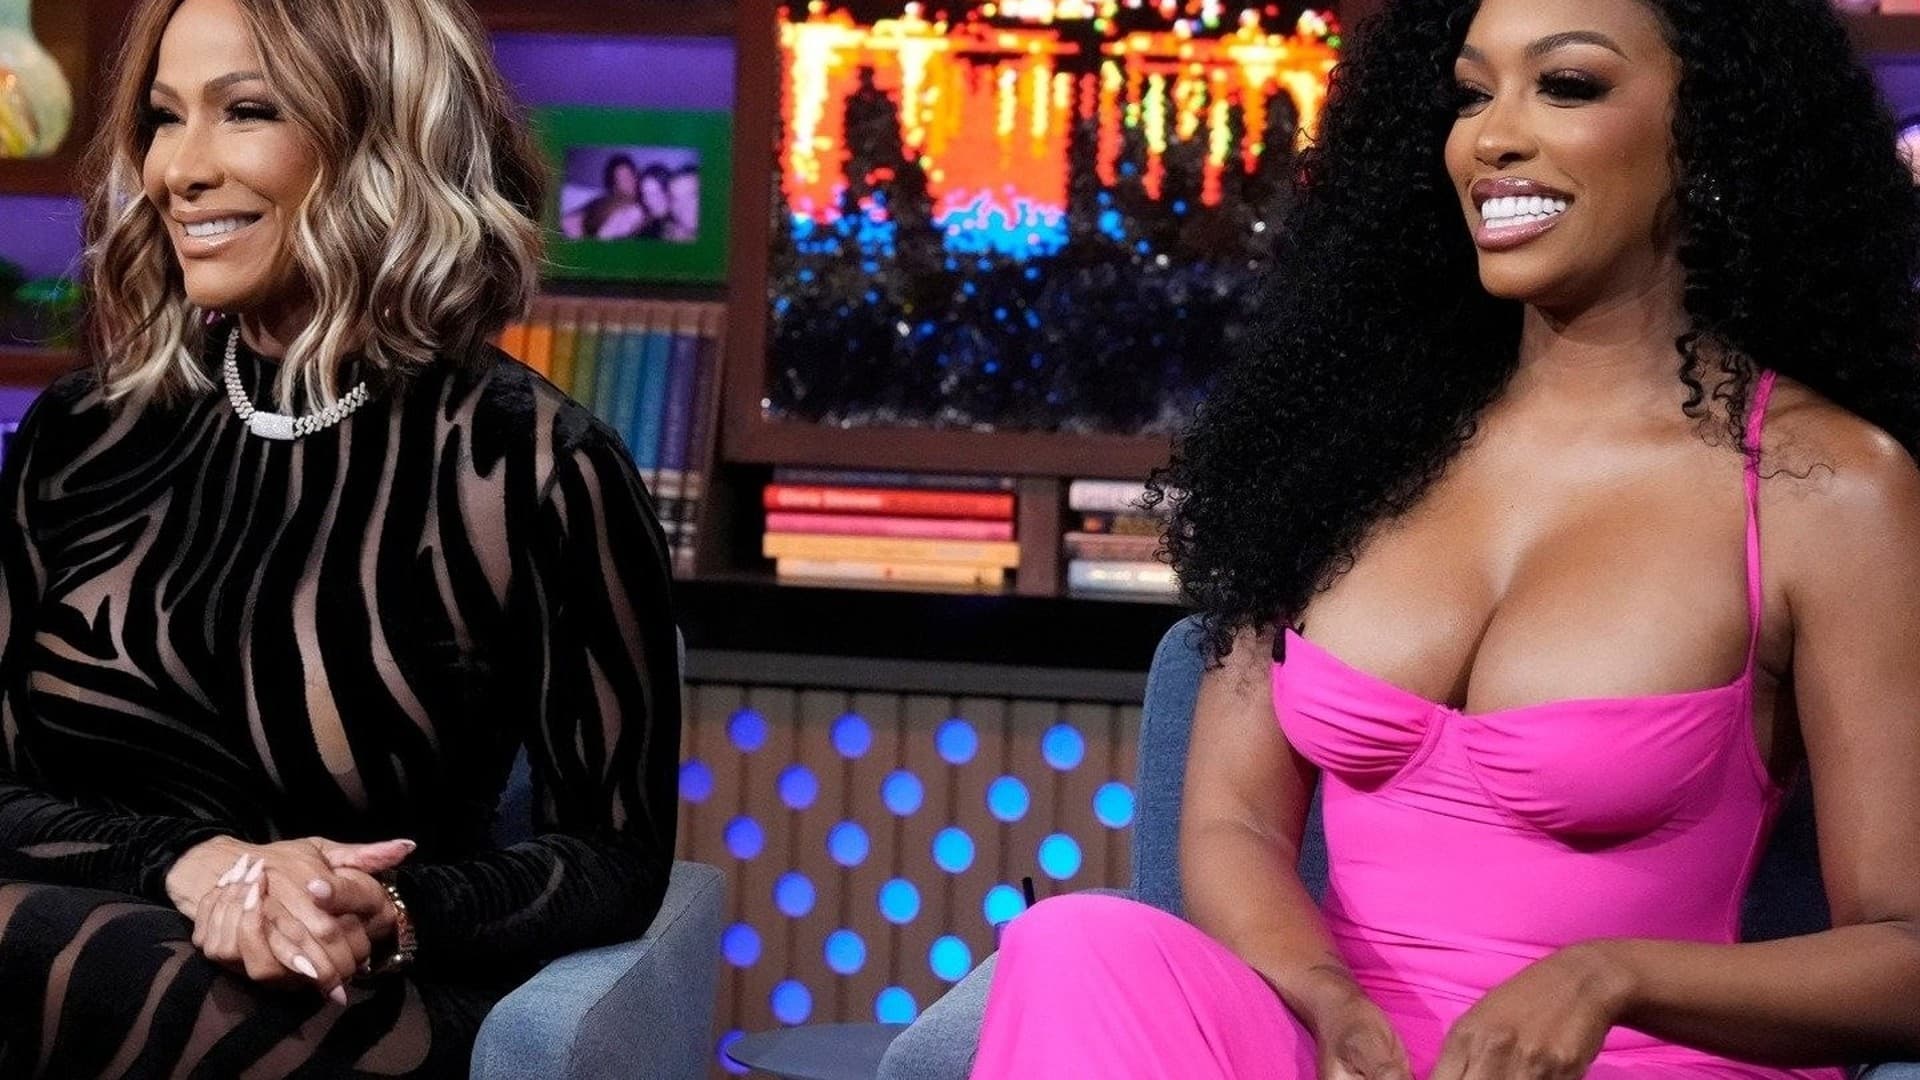 Watch What Happens Live with Andy Cohen Season 20 :Episode 99  Sheree Whitfield and Porsha Williams Guobadia